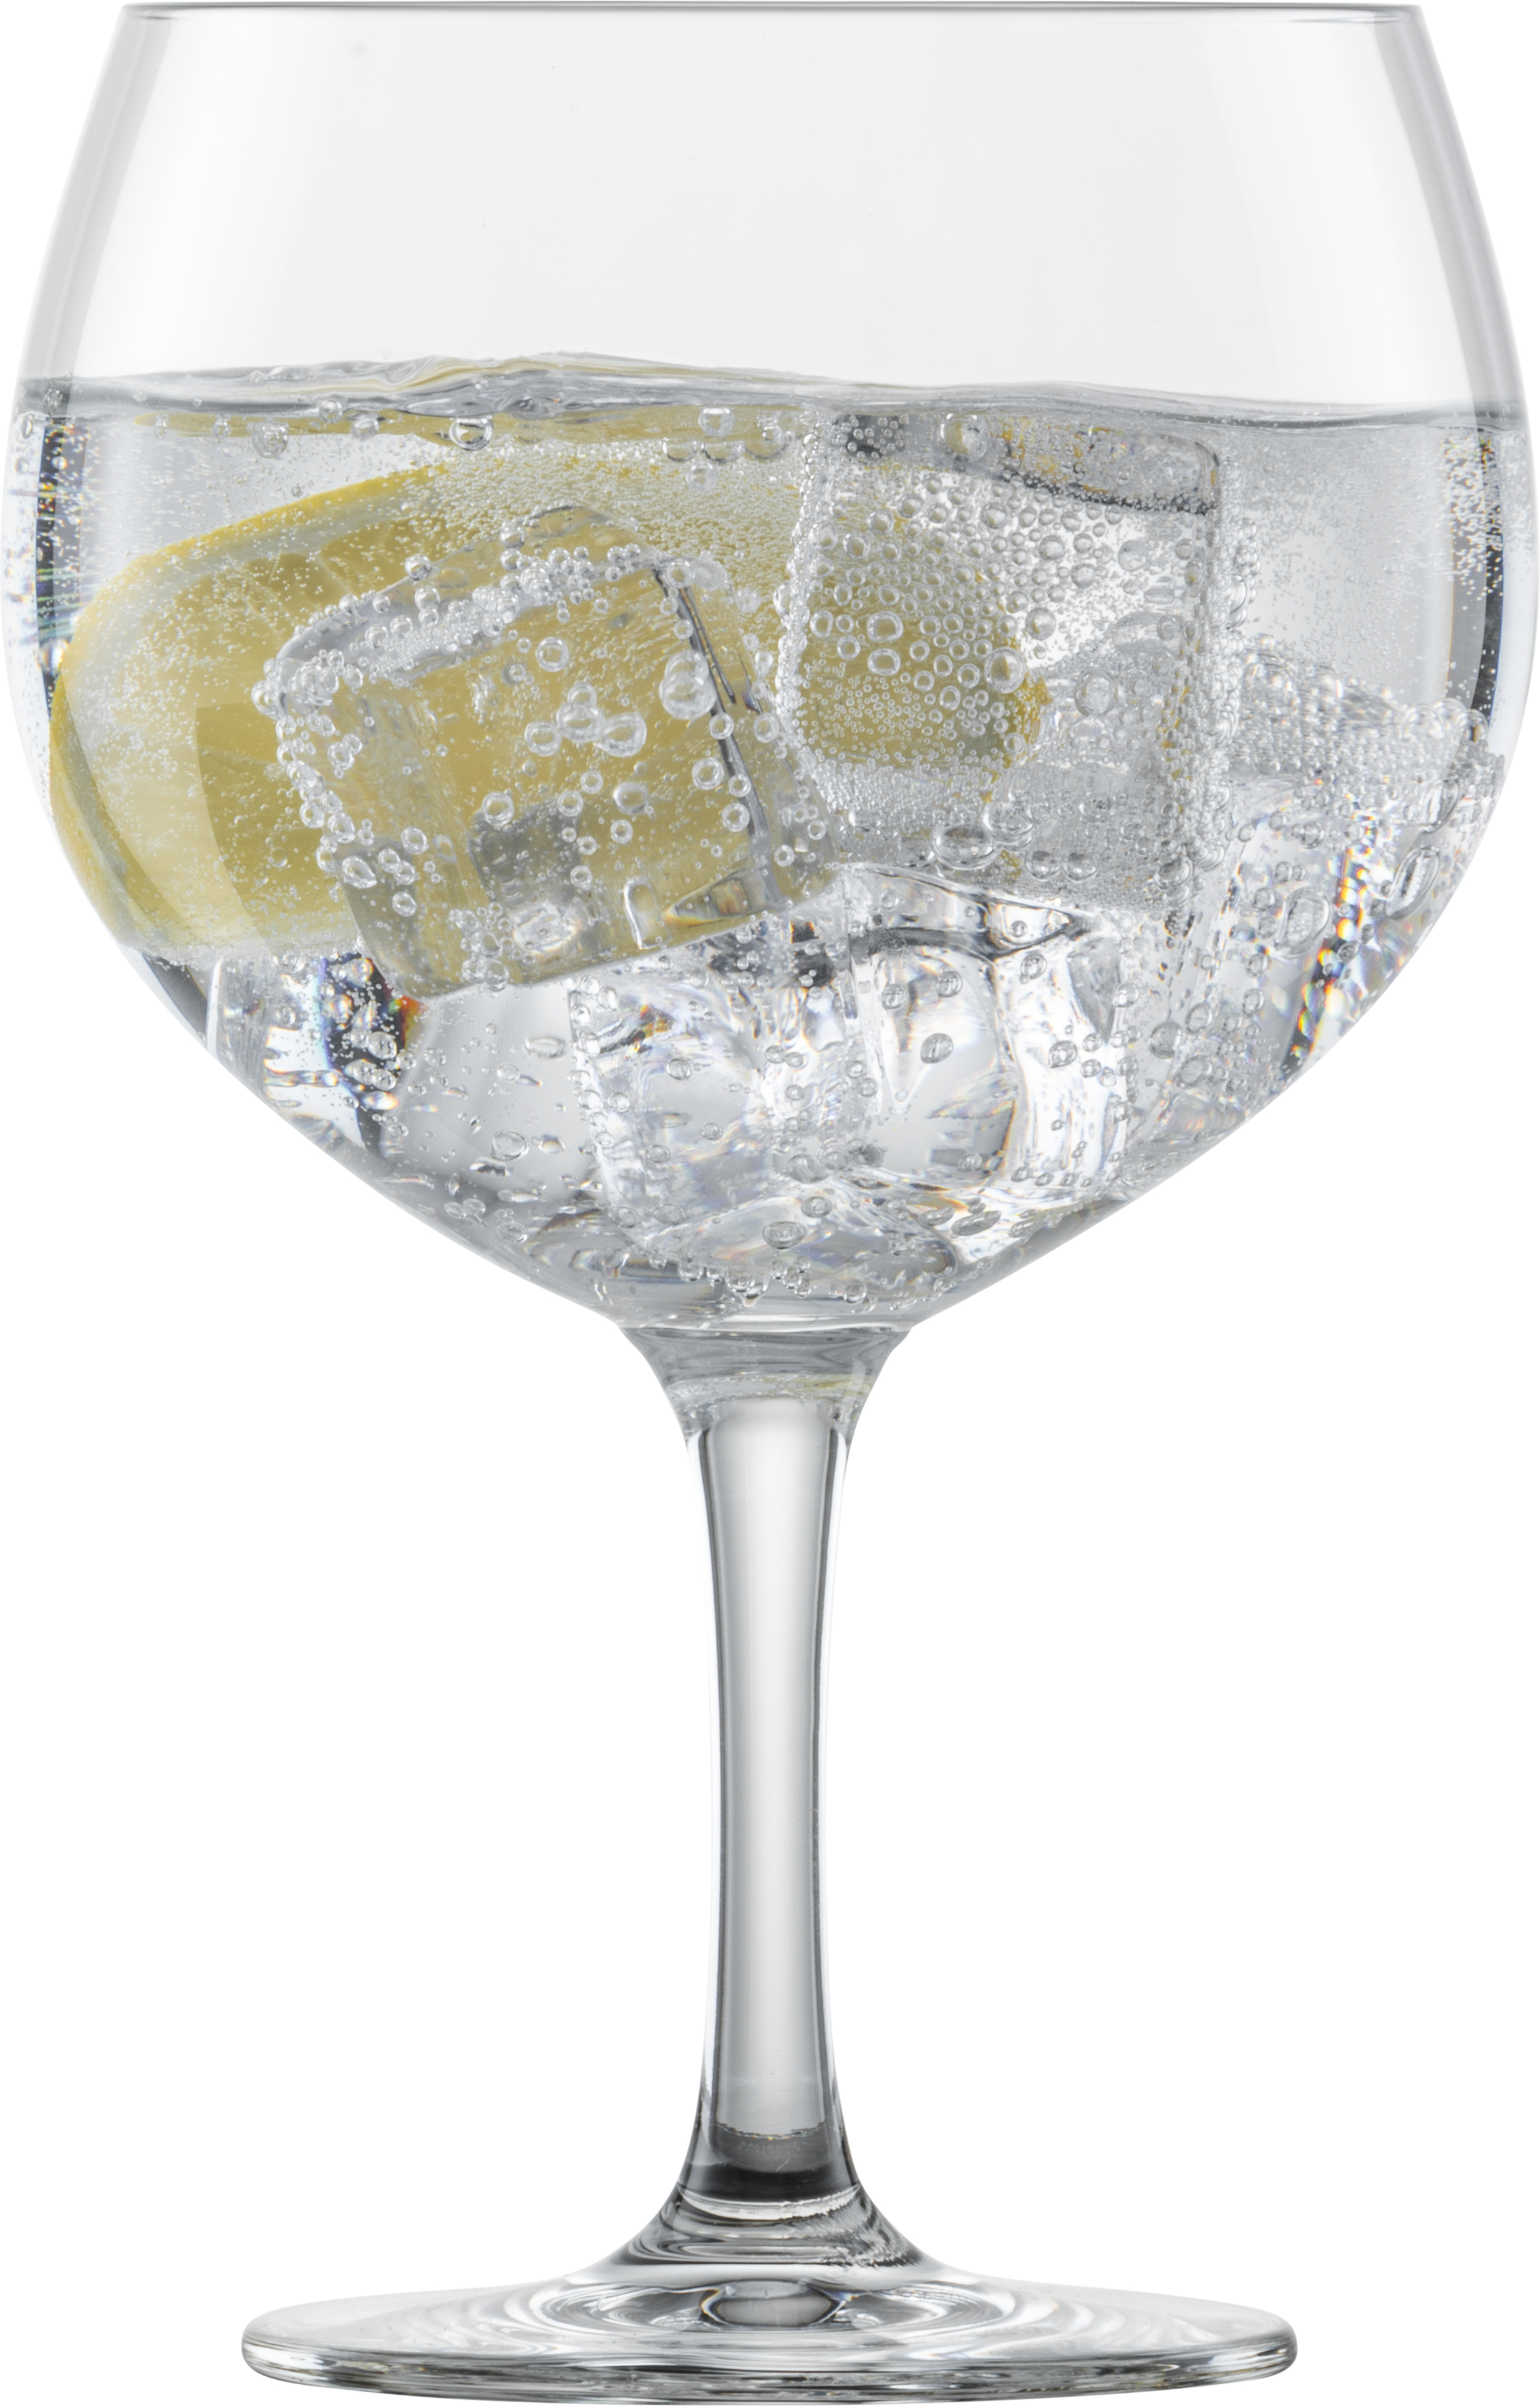 Schott Zwiesel Bar Special Gin and Tonic / Copa Glass 